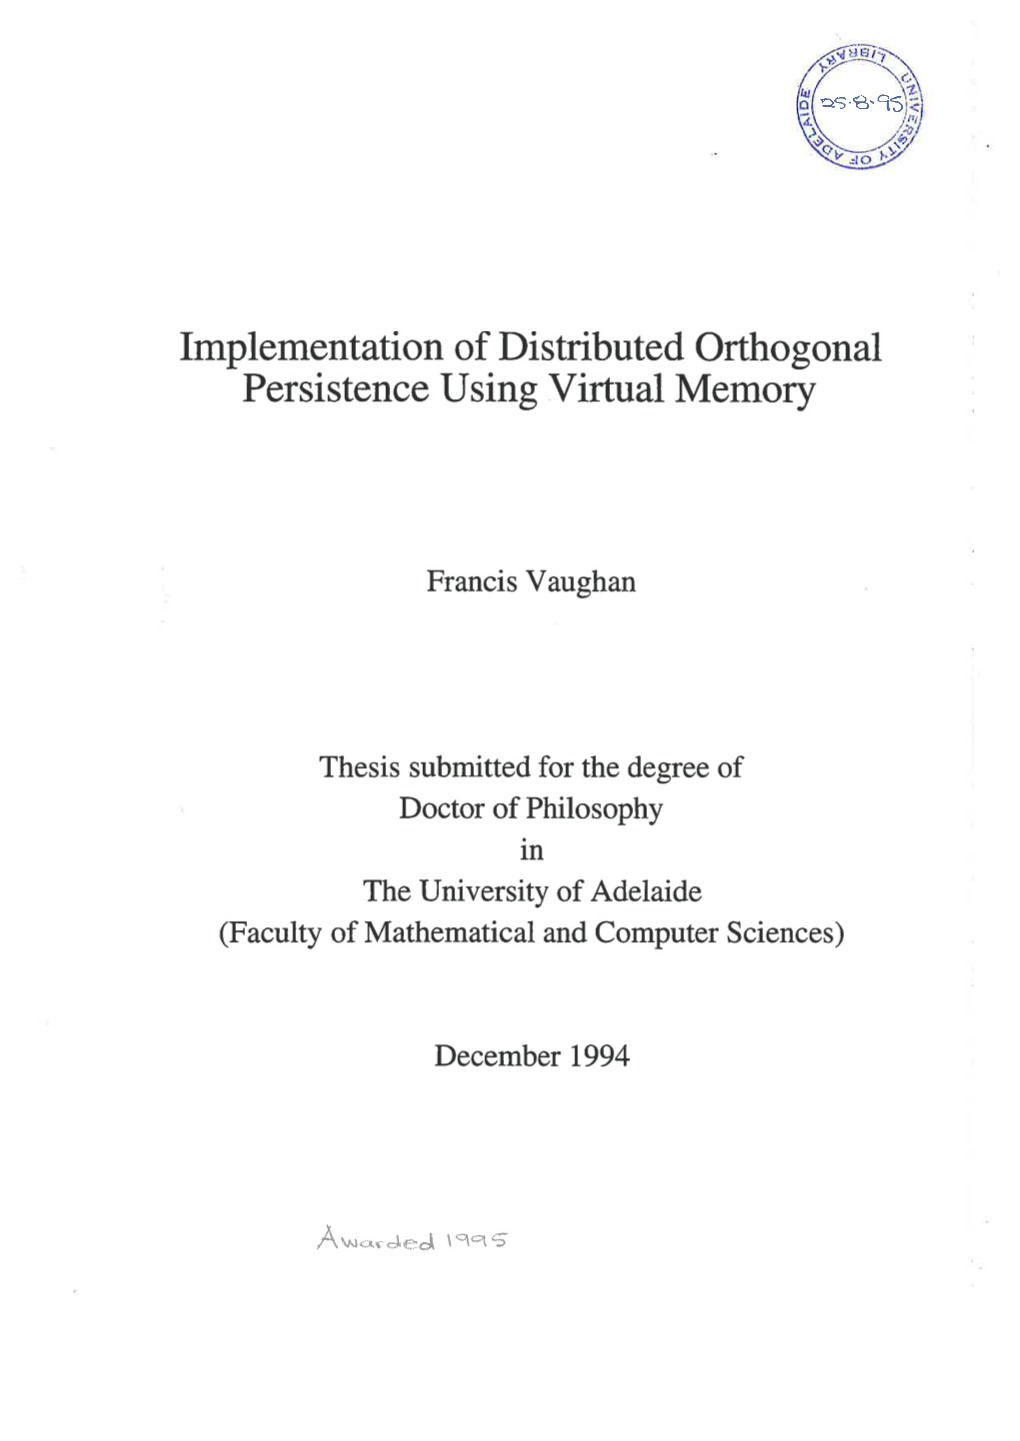 Implementation of Distributed Orthogonal Persistence Using